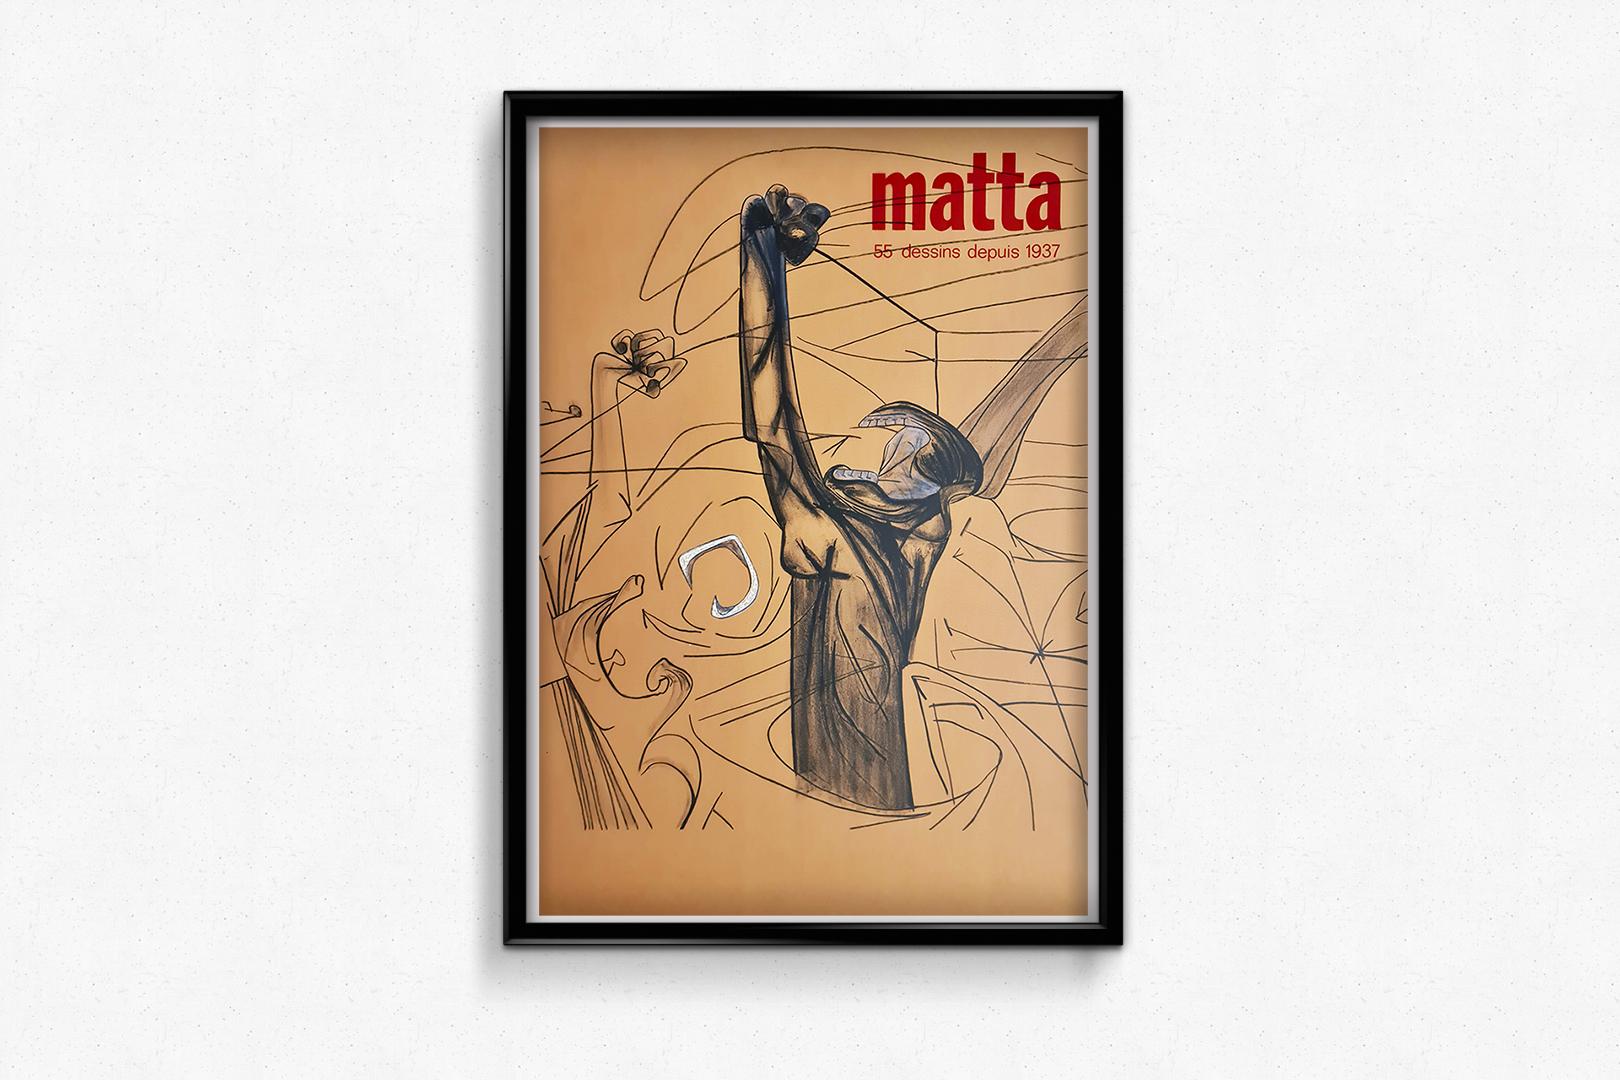 Beautiful poster of exhibition tracing the 55 drawings of Matta since 1937.

Born on November 11, 1911 in Santiago, Chile, he graduated in architecture from the Catholic University of Santiago in 1932 and then moved to Paris to work in Le